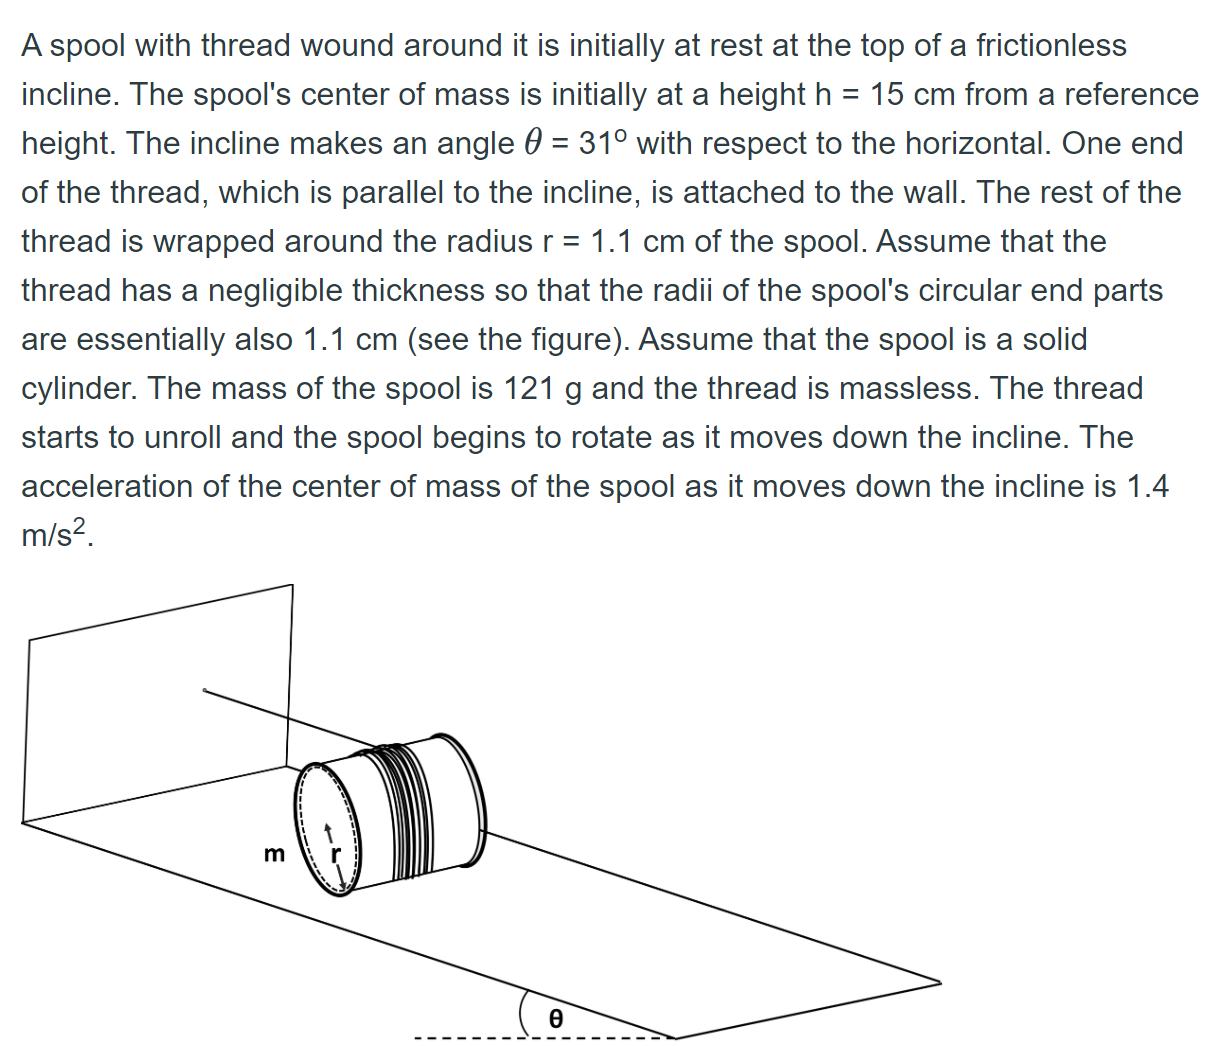 A spool with thread wound around it is initially at rest at the top of a frictionless incline. The spool's